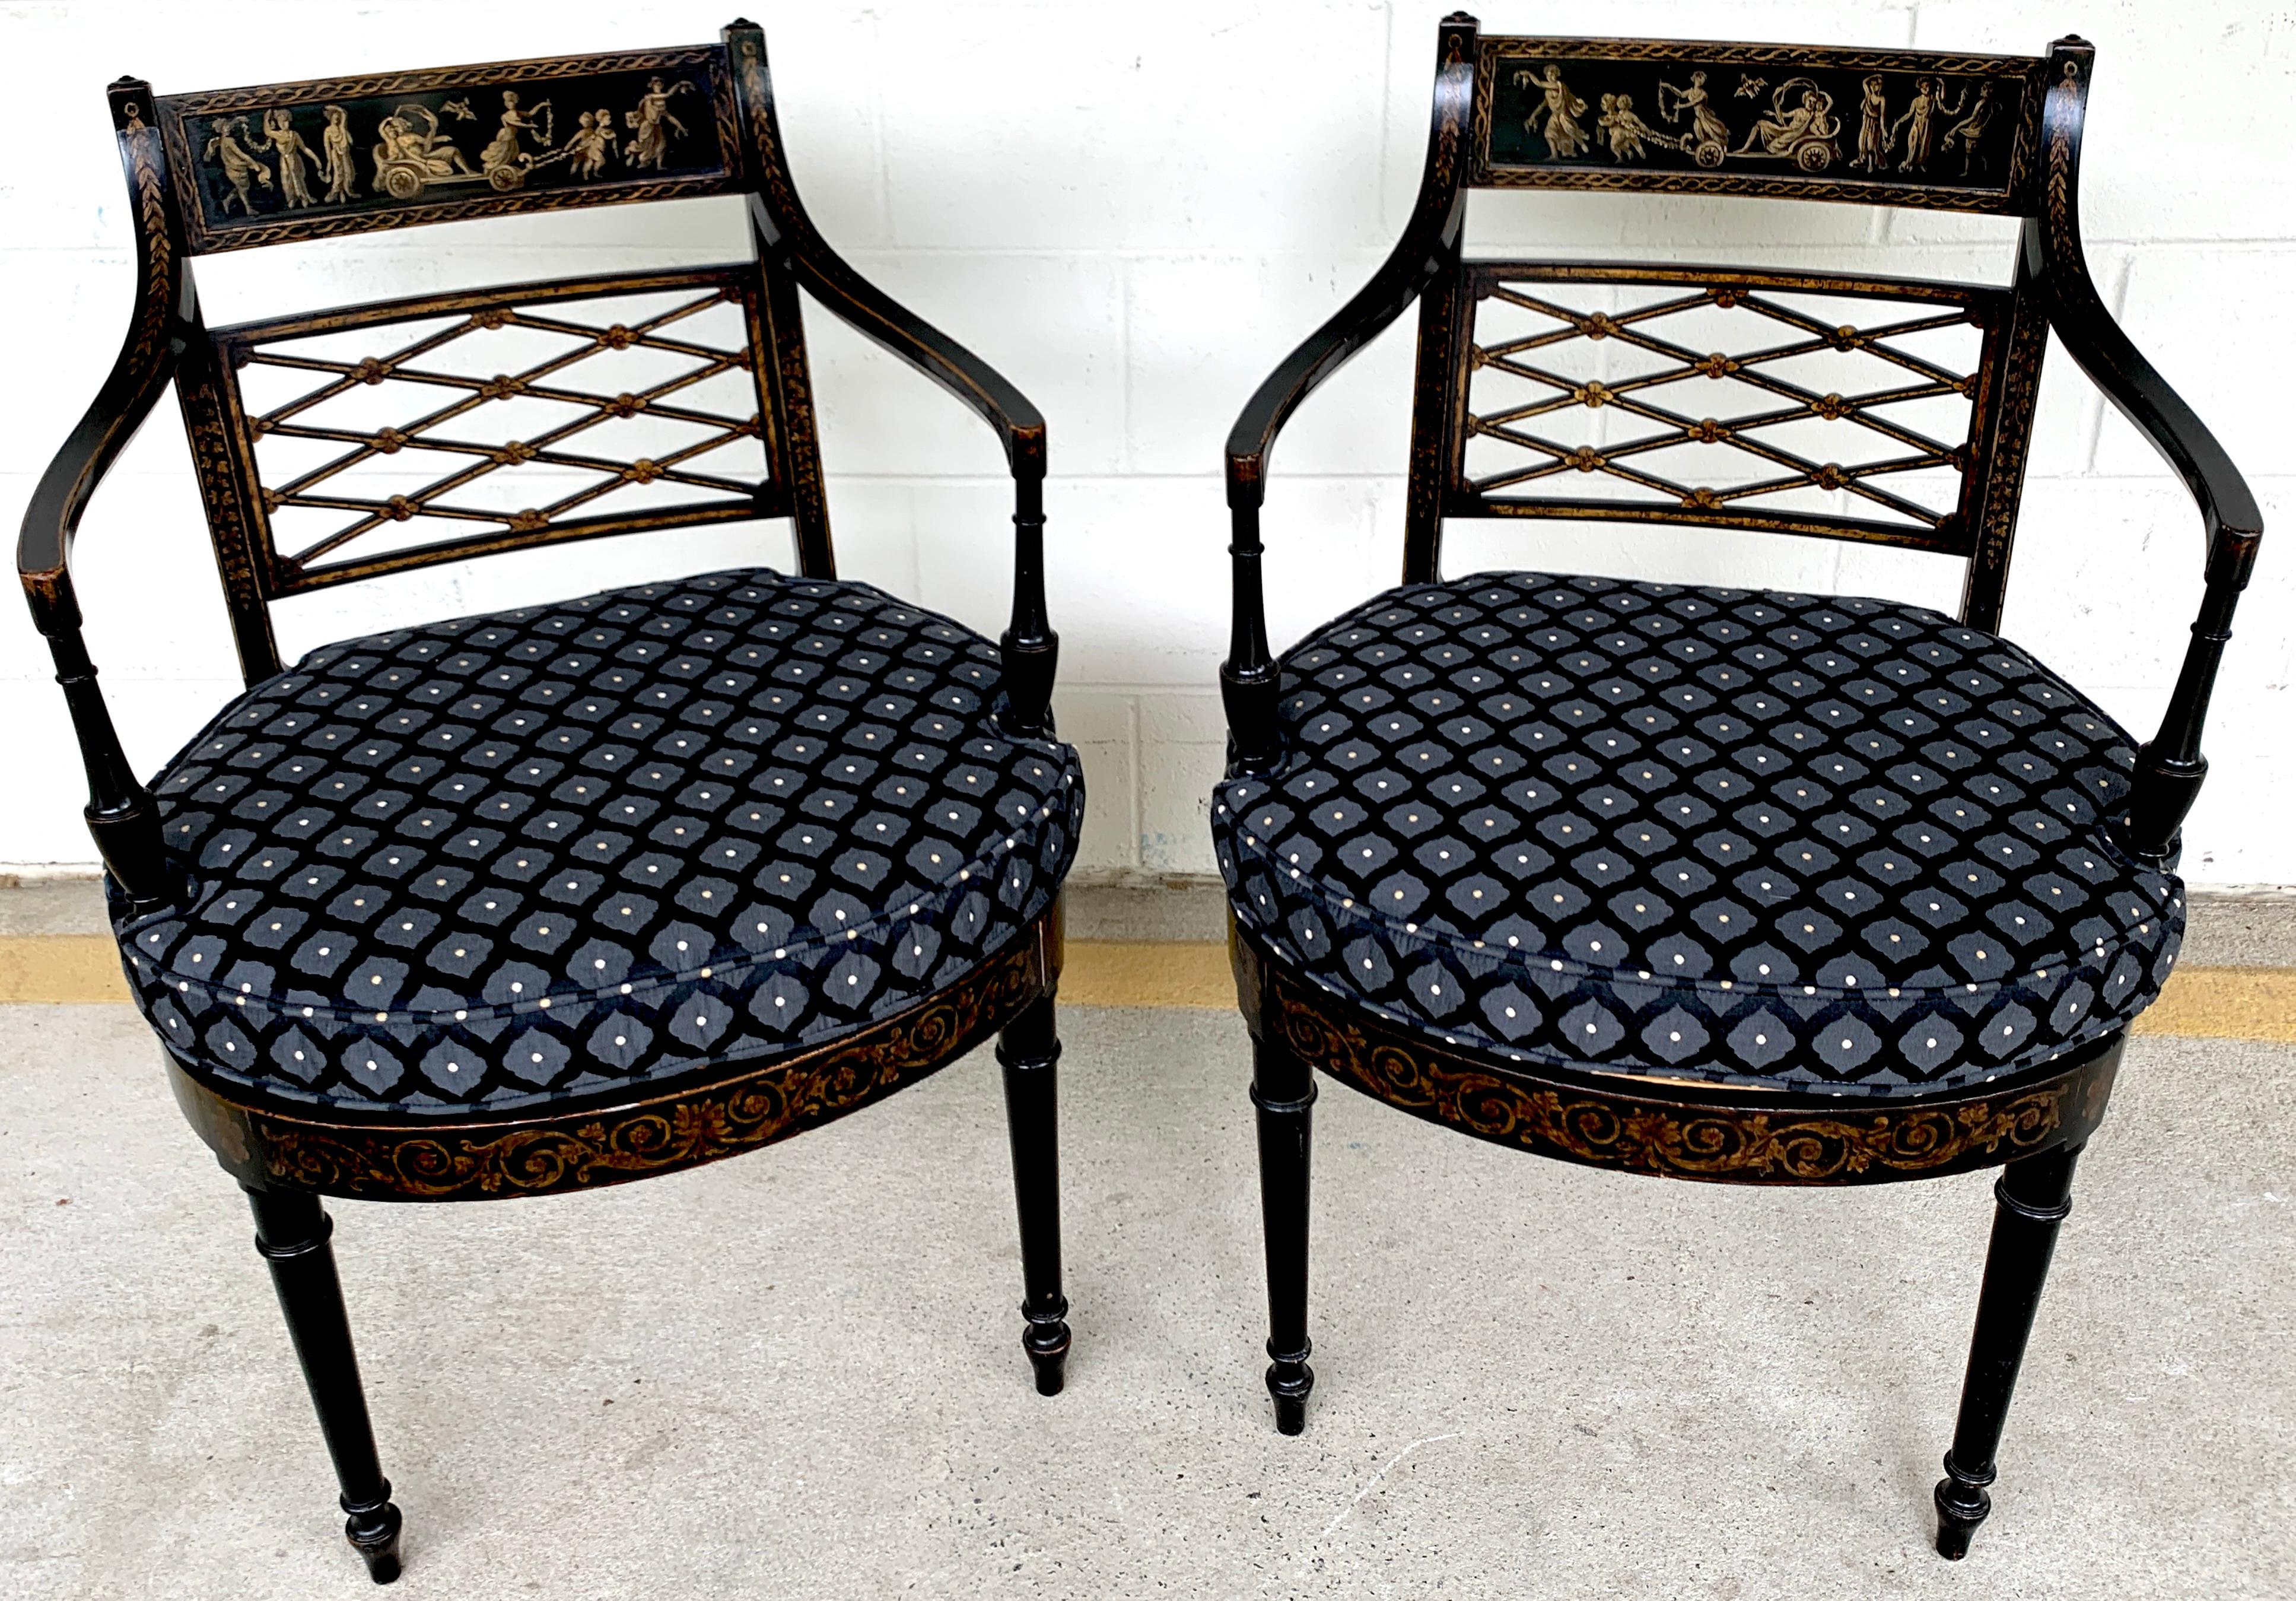 Pair of Regency black and polychrome cane seat armchairs, each one beautifully painted and gilt with classical scenes, cane seats, custom removable cushions
Seat height is 18.5